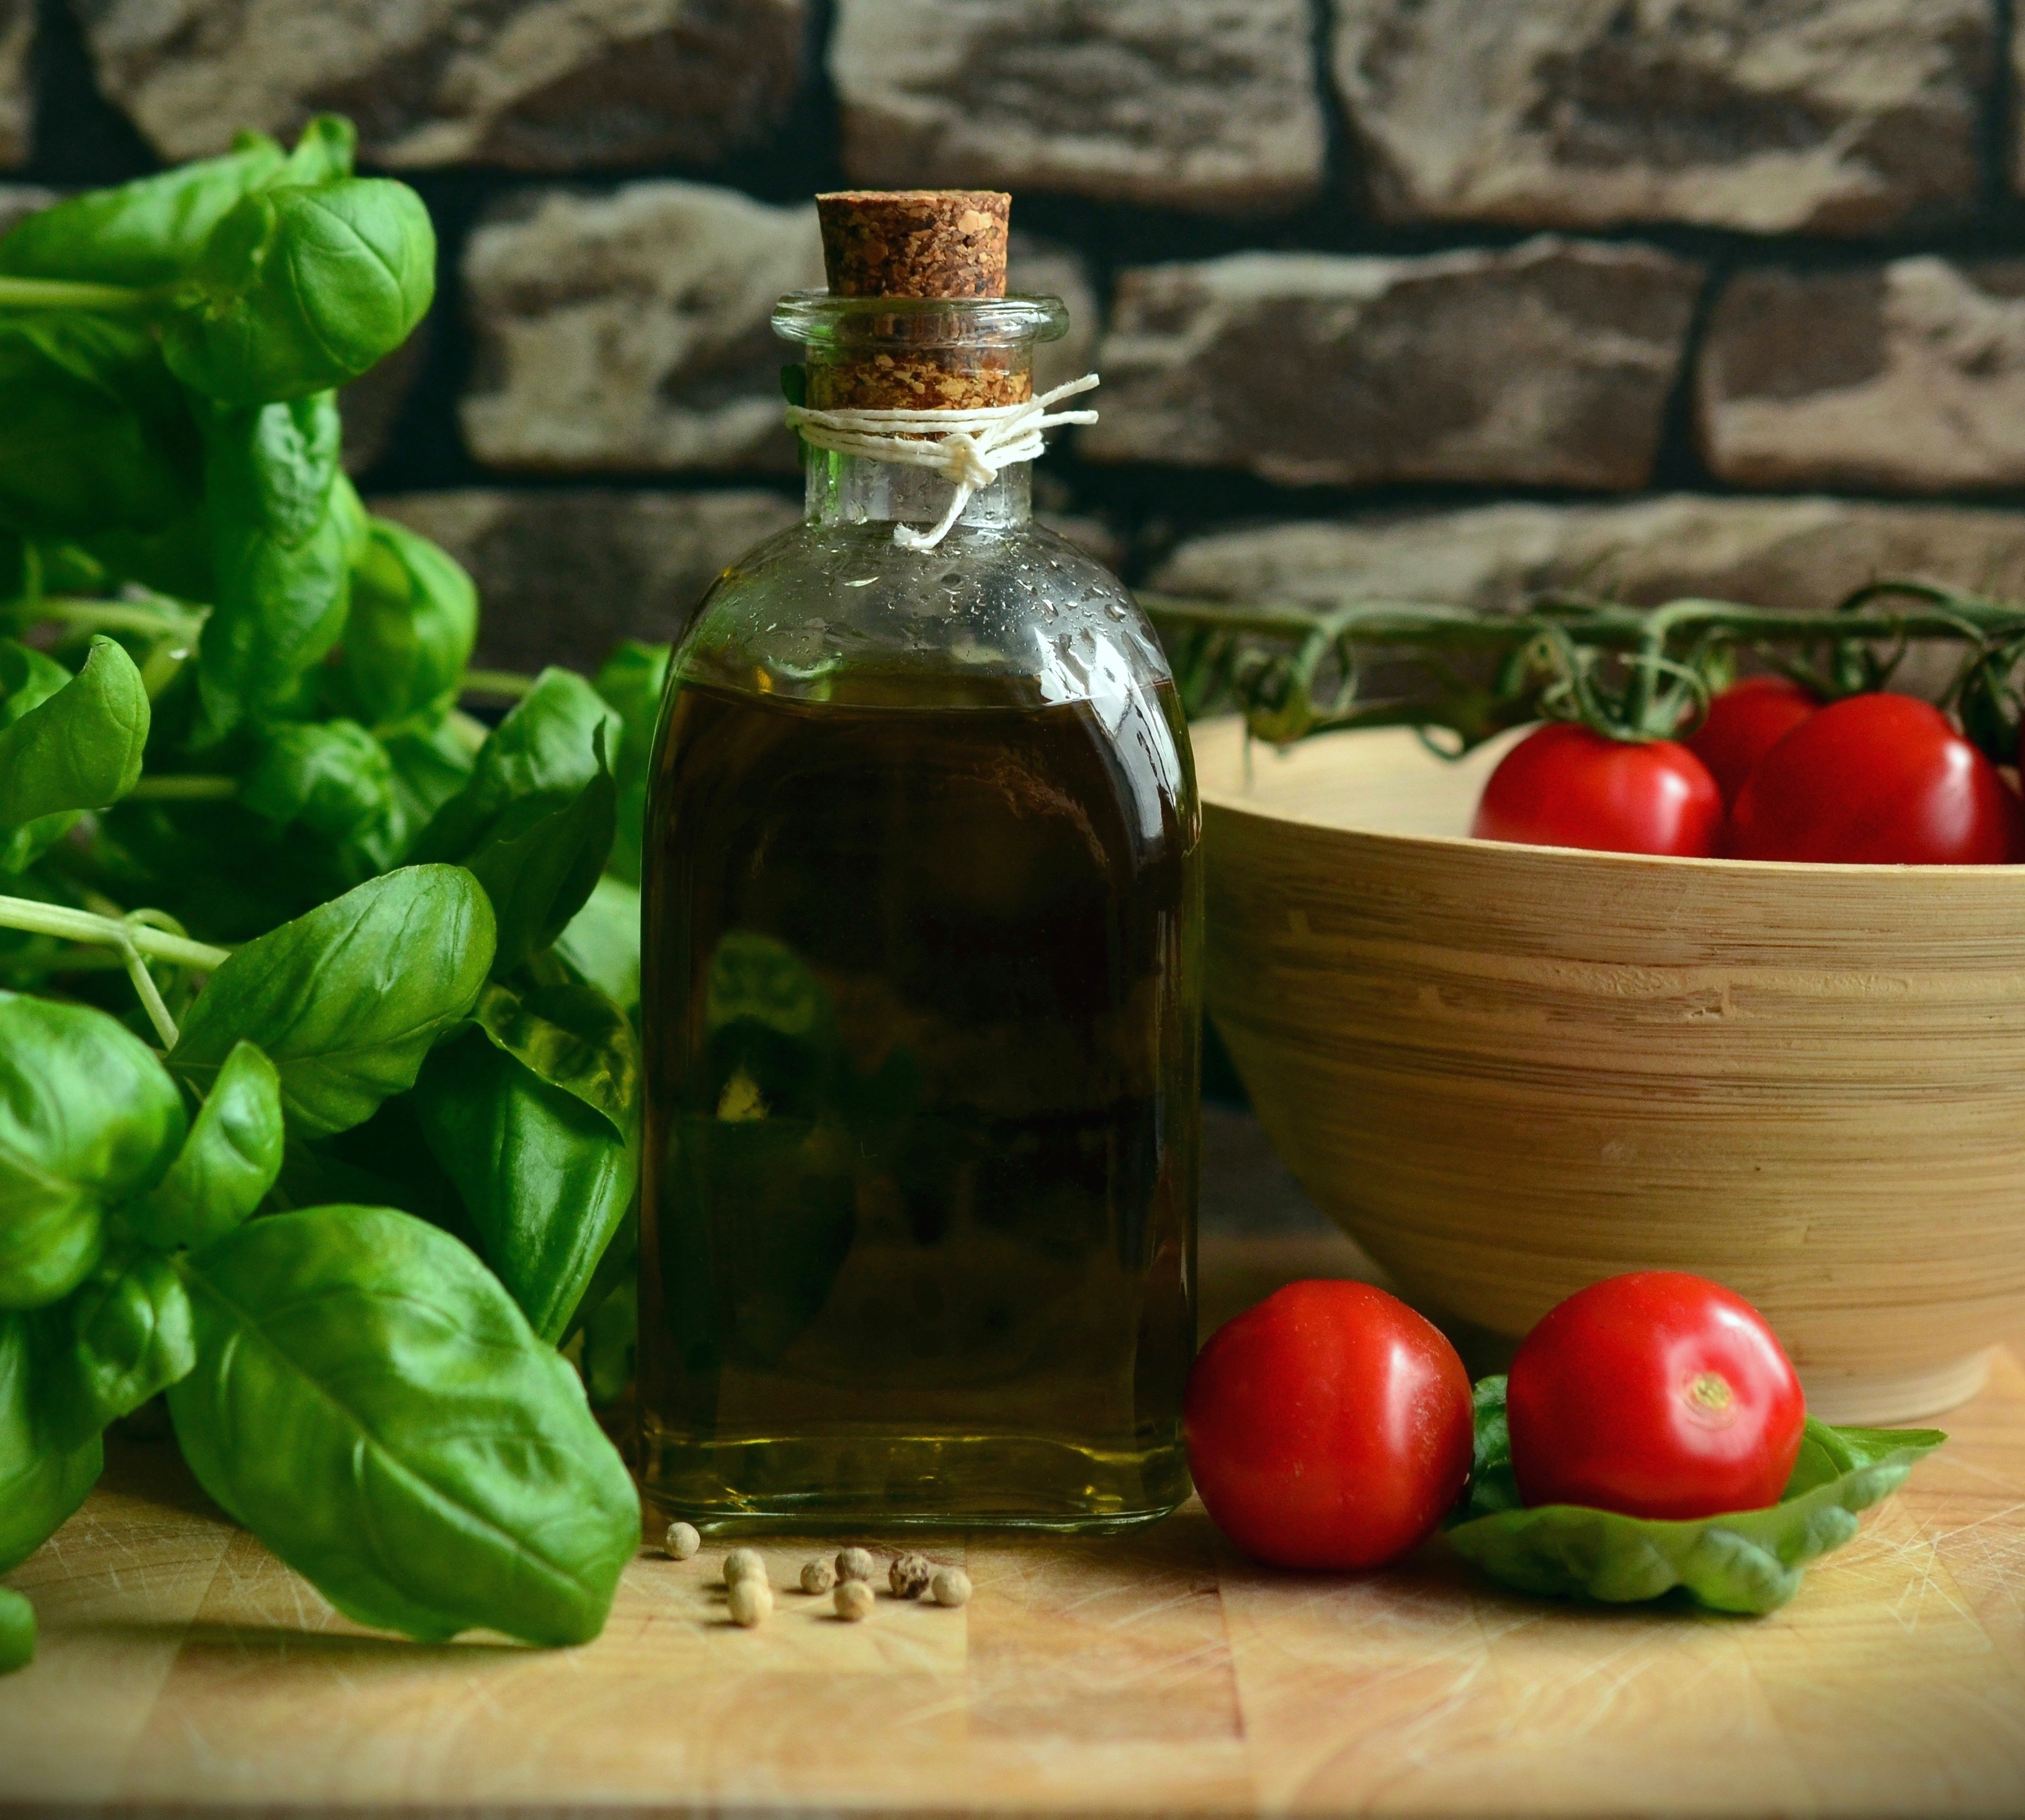 Picture of basil plant, vinegar and tomatoes